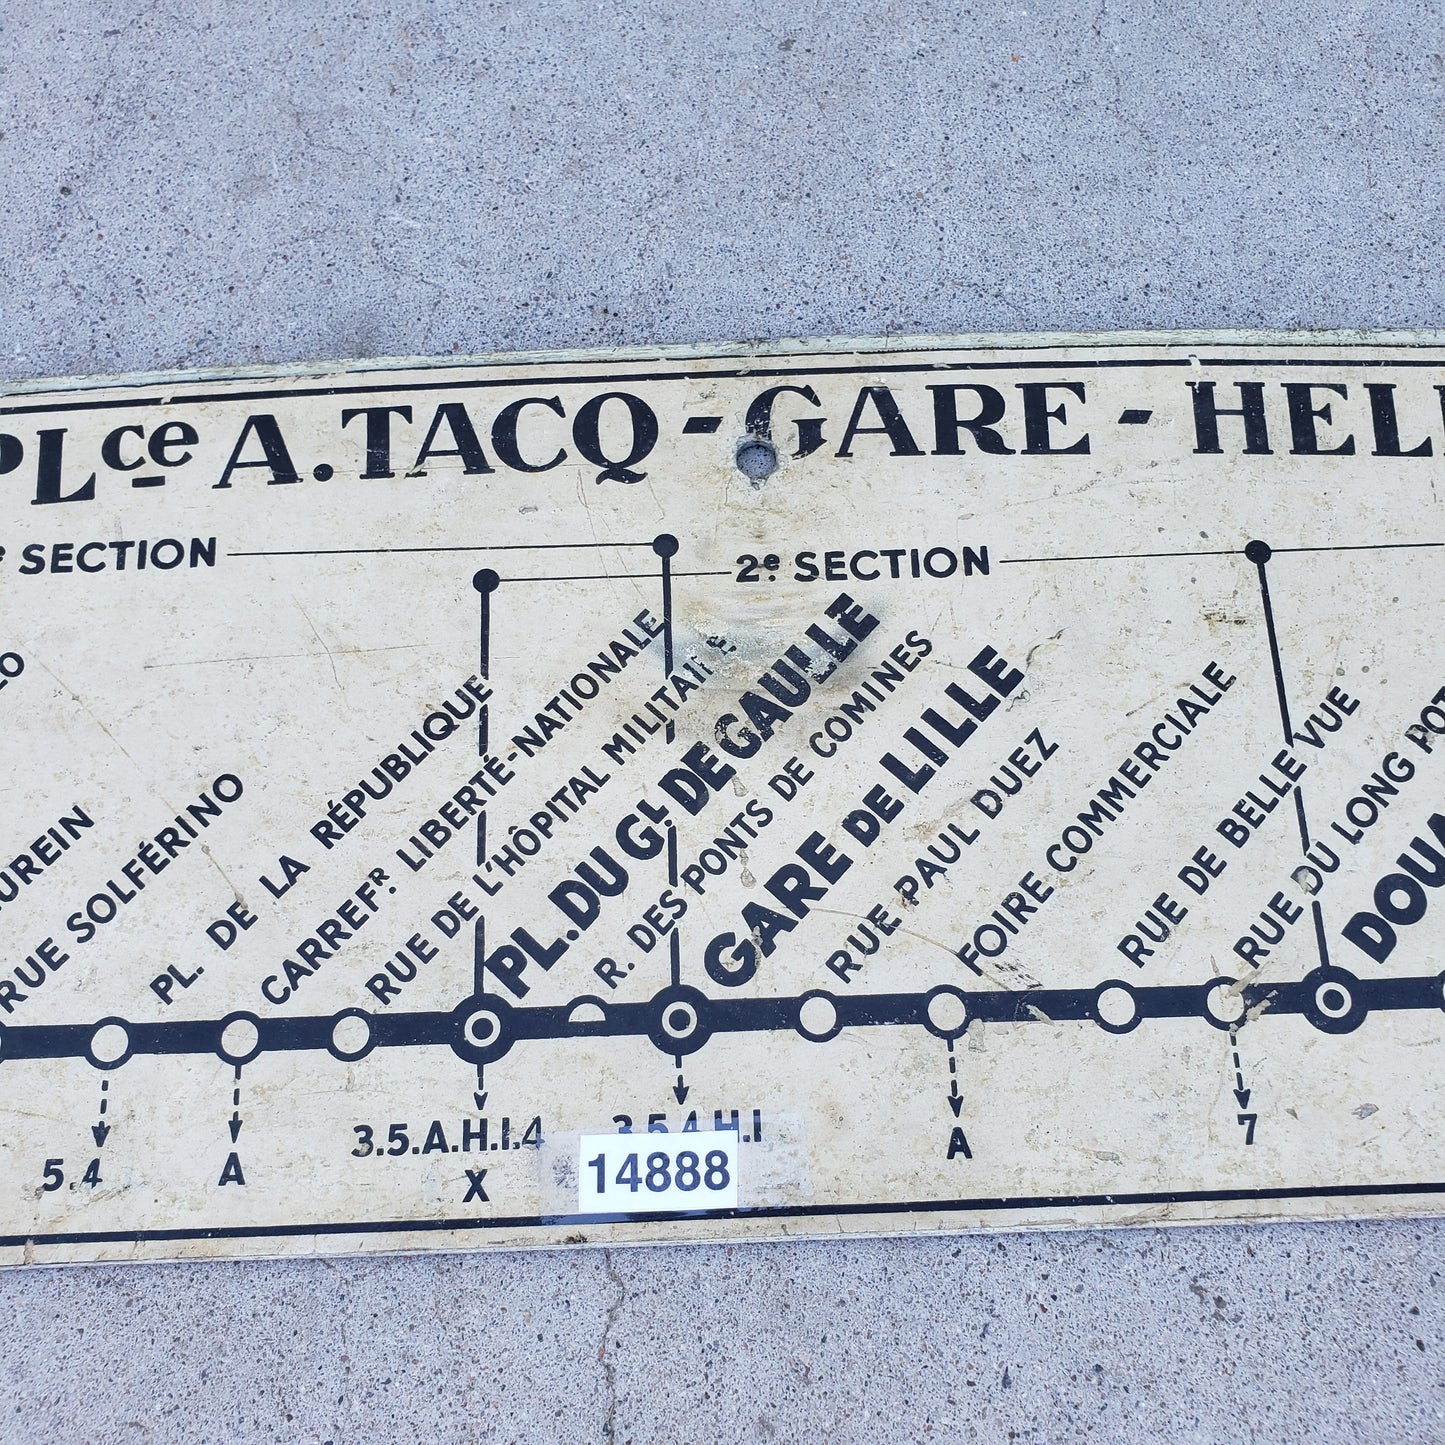 Double Sided French Metal Metro Station Sign - B PLce a Taco Gare - Hellemmes